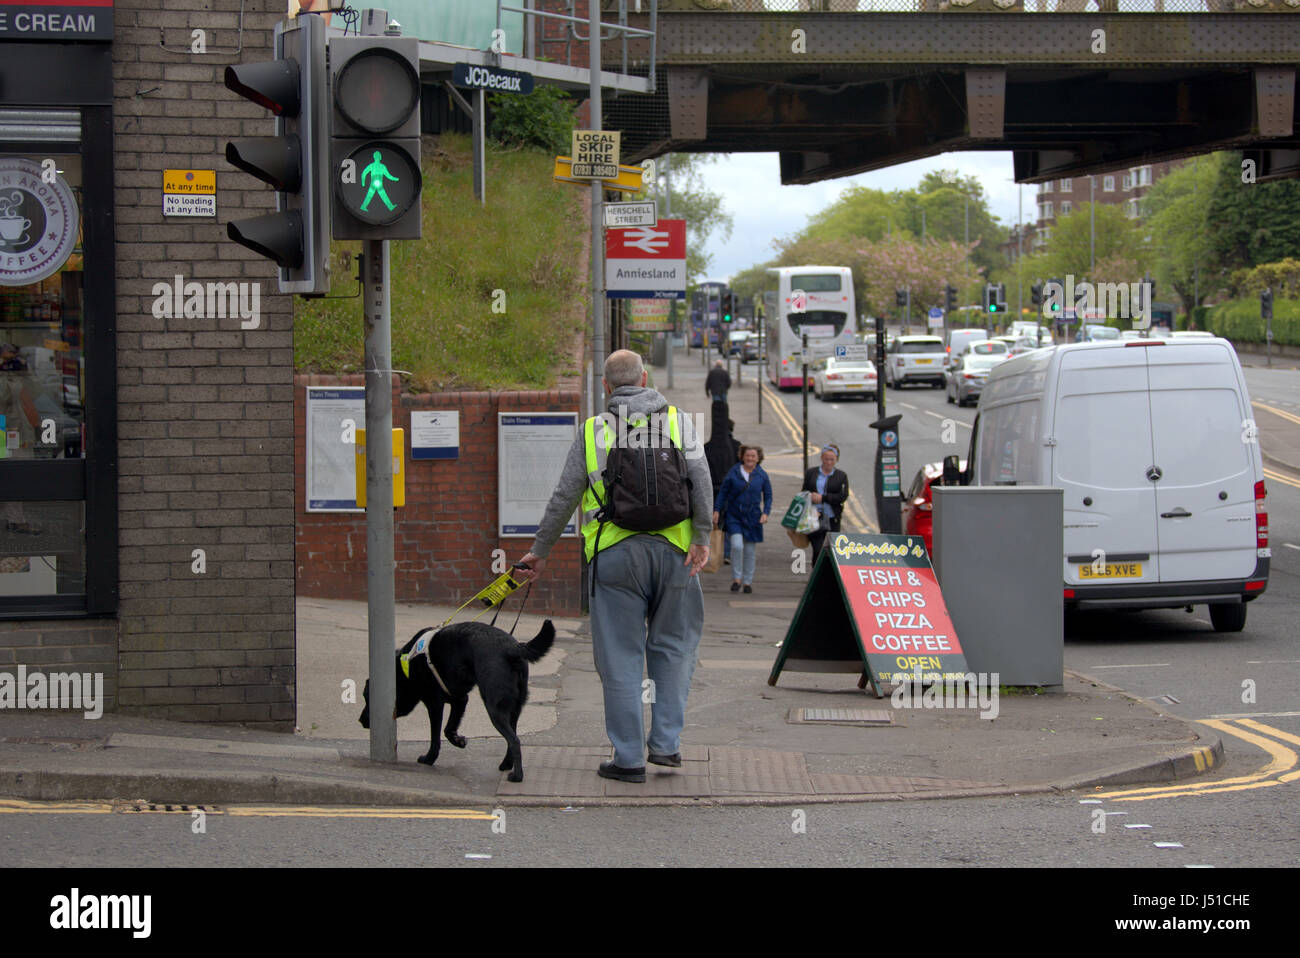 blind man with guide dog at traffic lights green man go street scene Glasgow Stock Photo